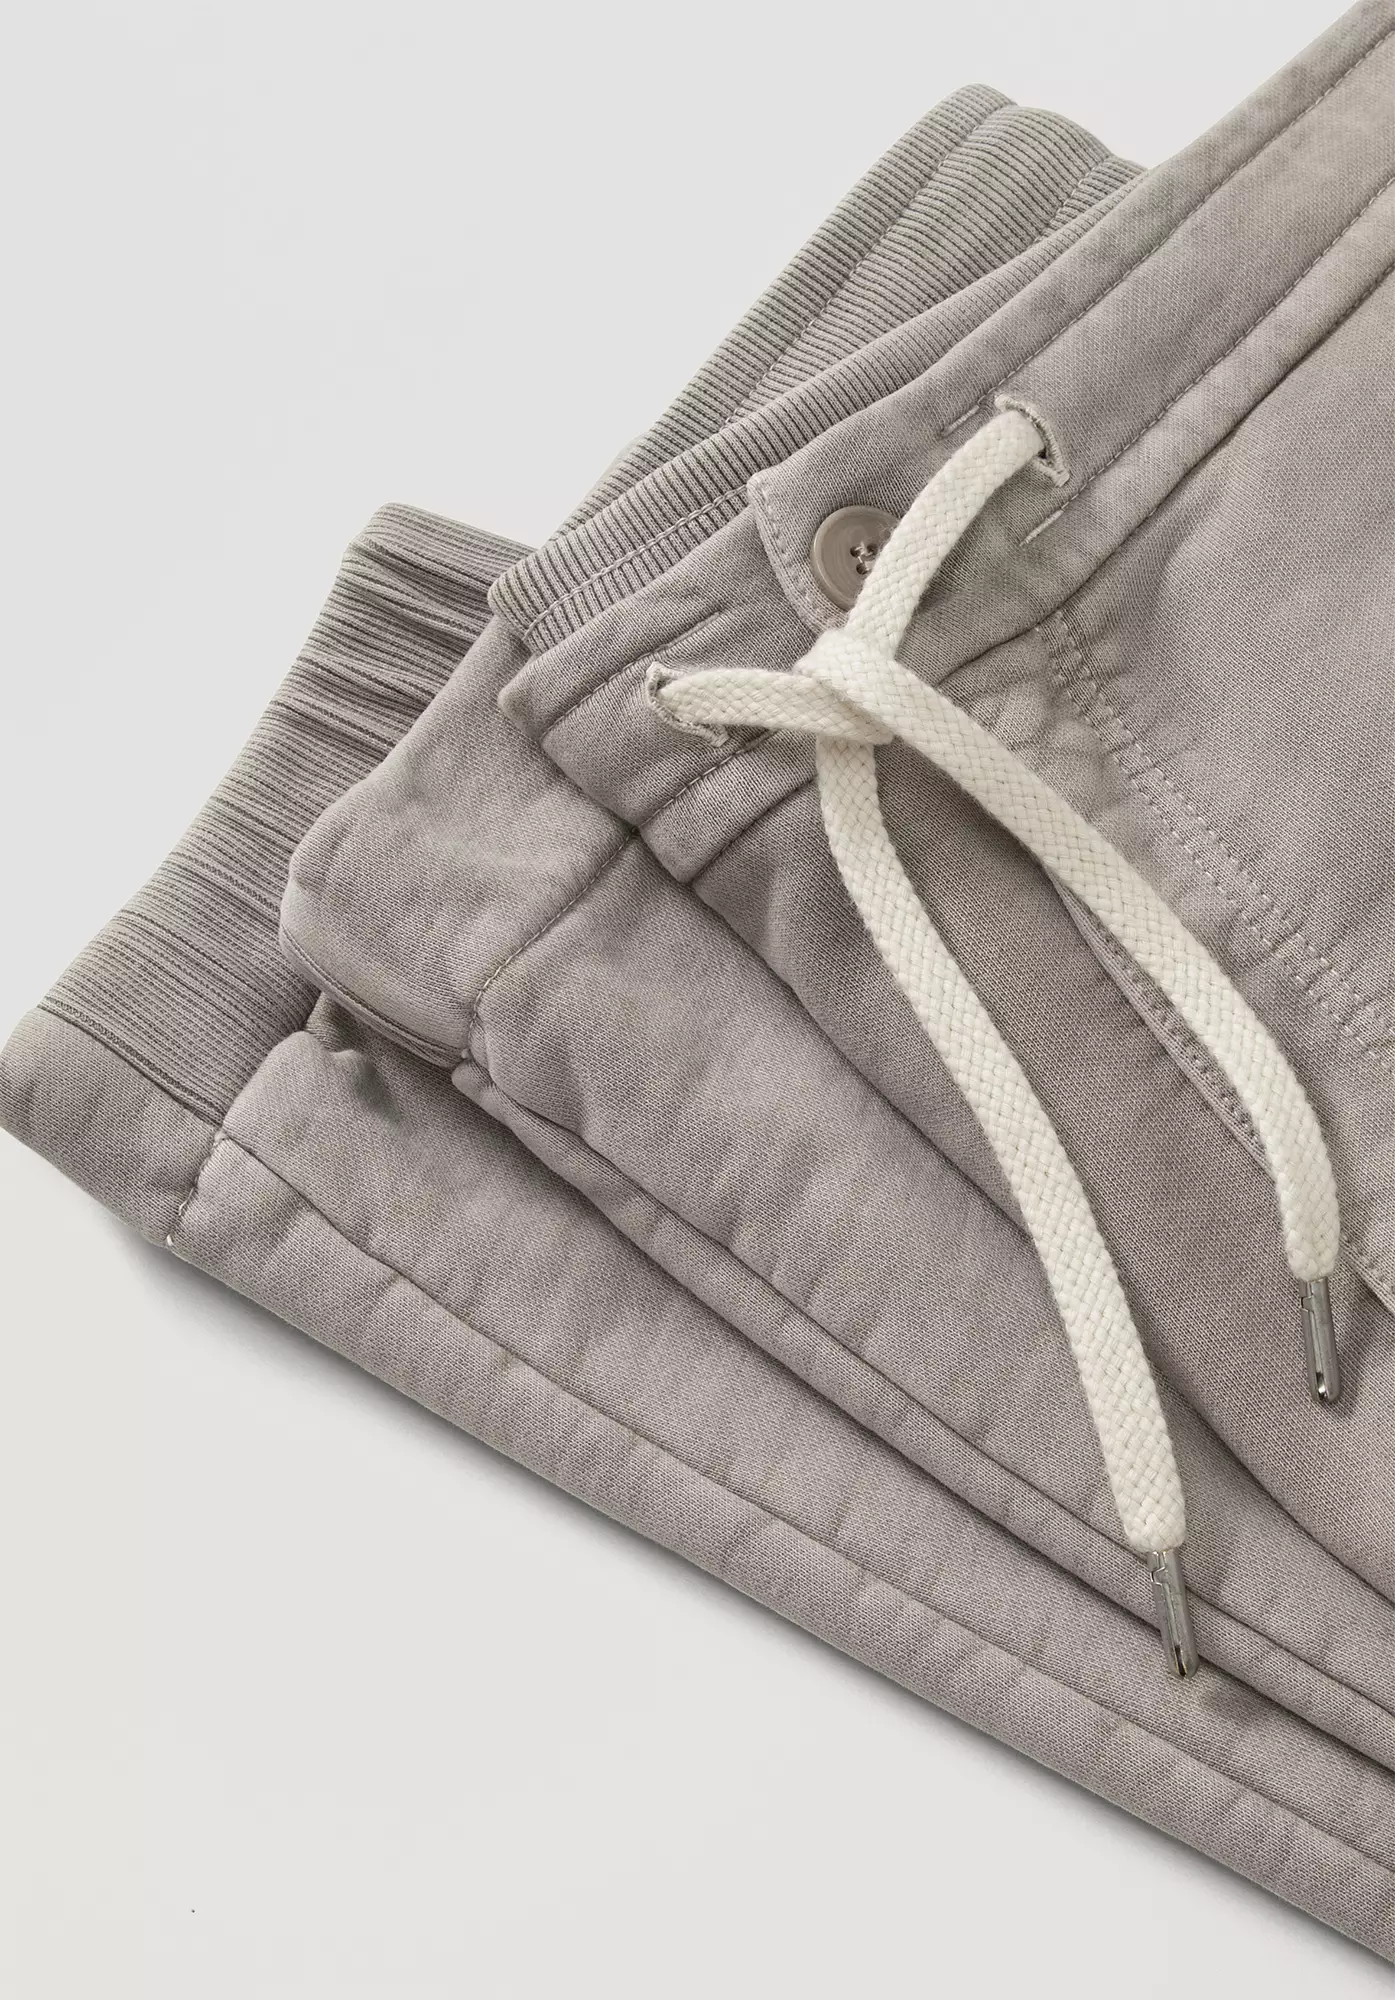 Jogging pants, mineral-dyed, made of pure organic cotton - 5